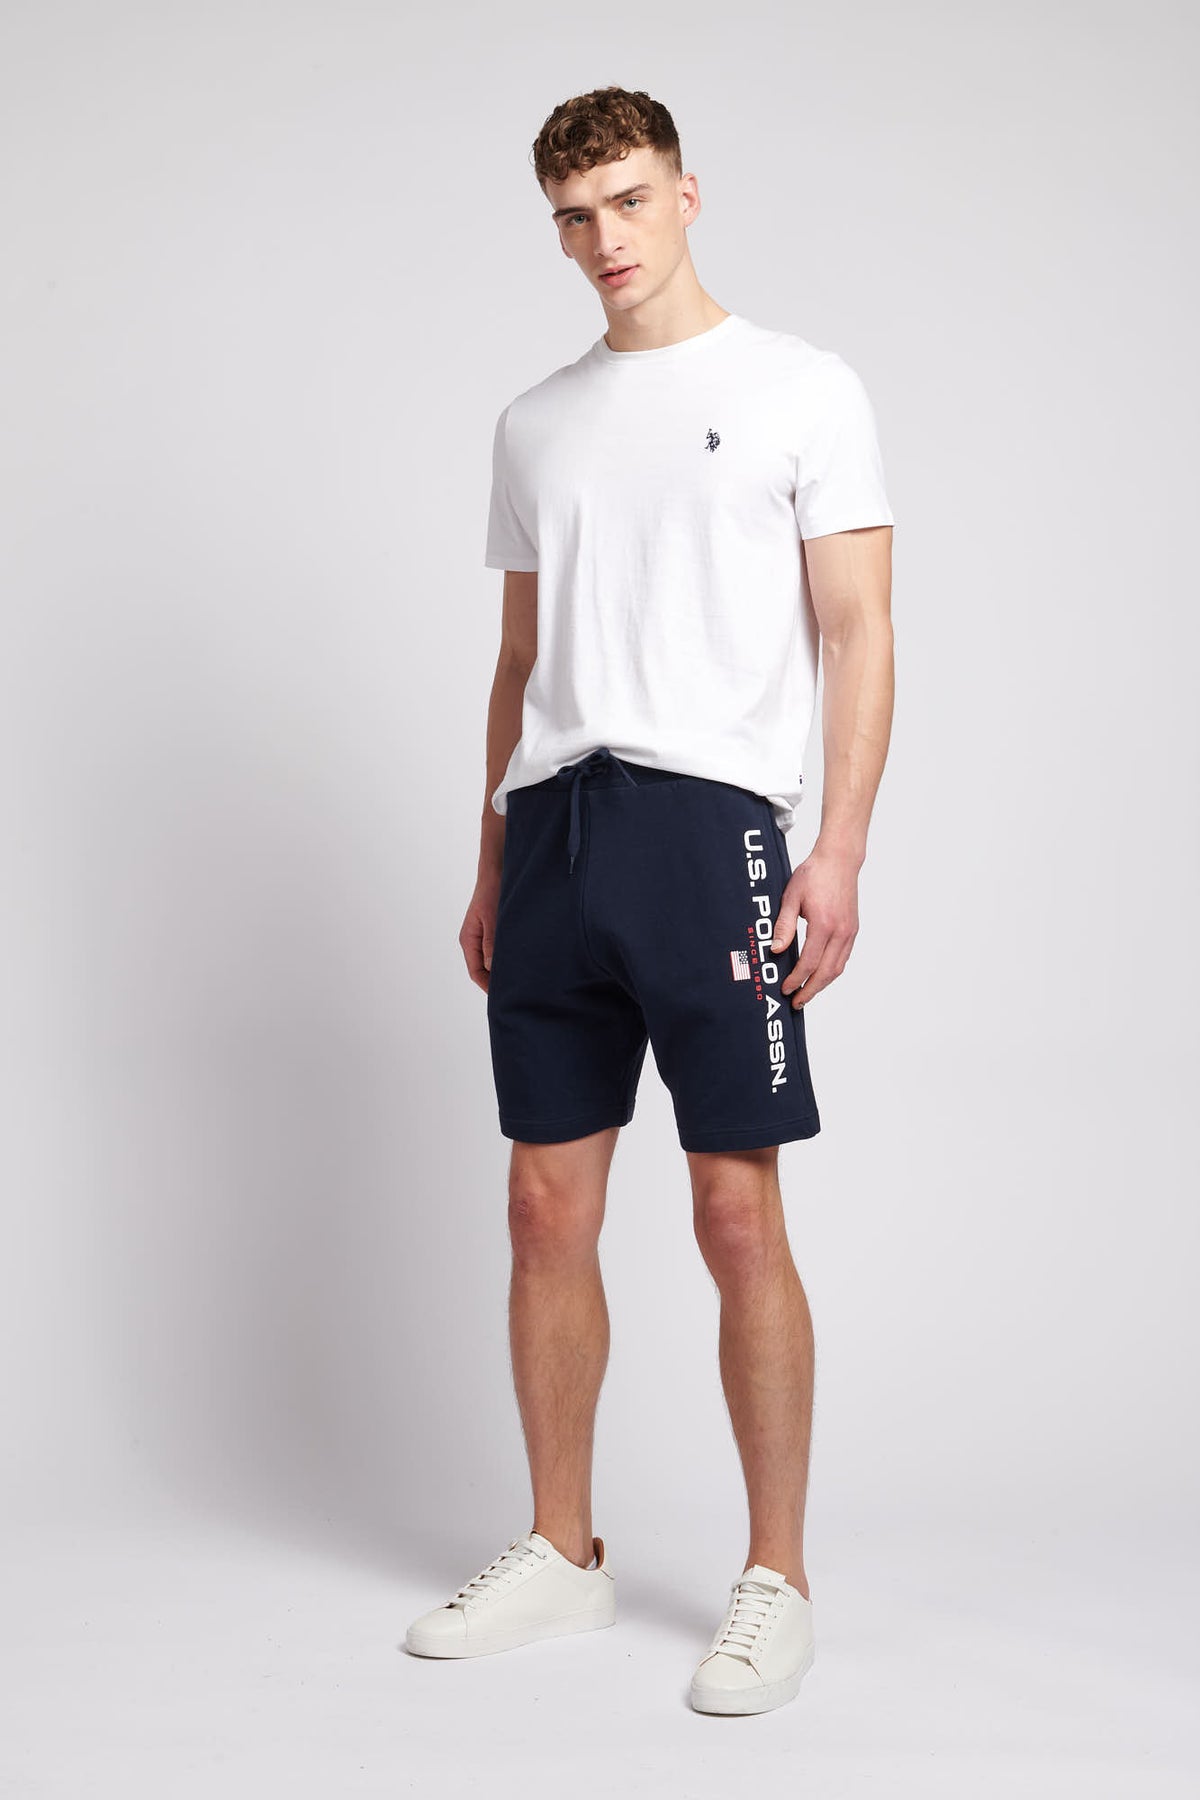 Mens Block Flag Graphic Shorts in Navy Blue